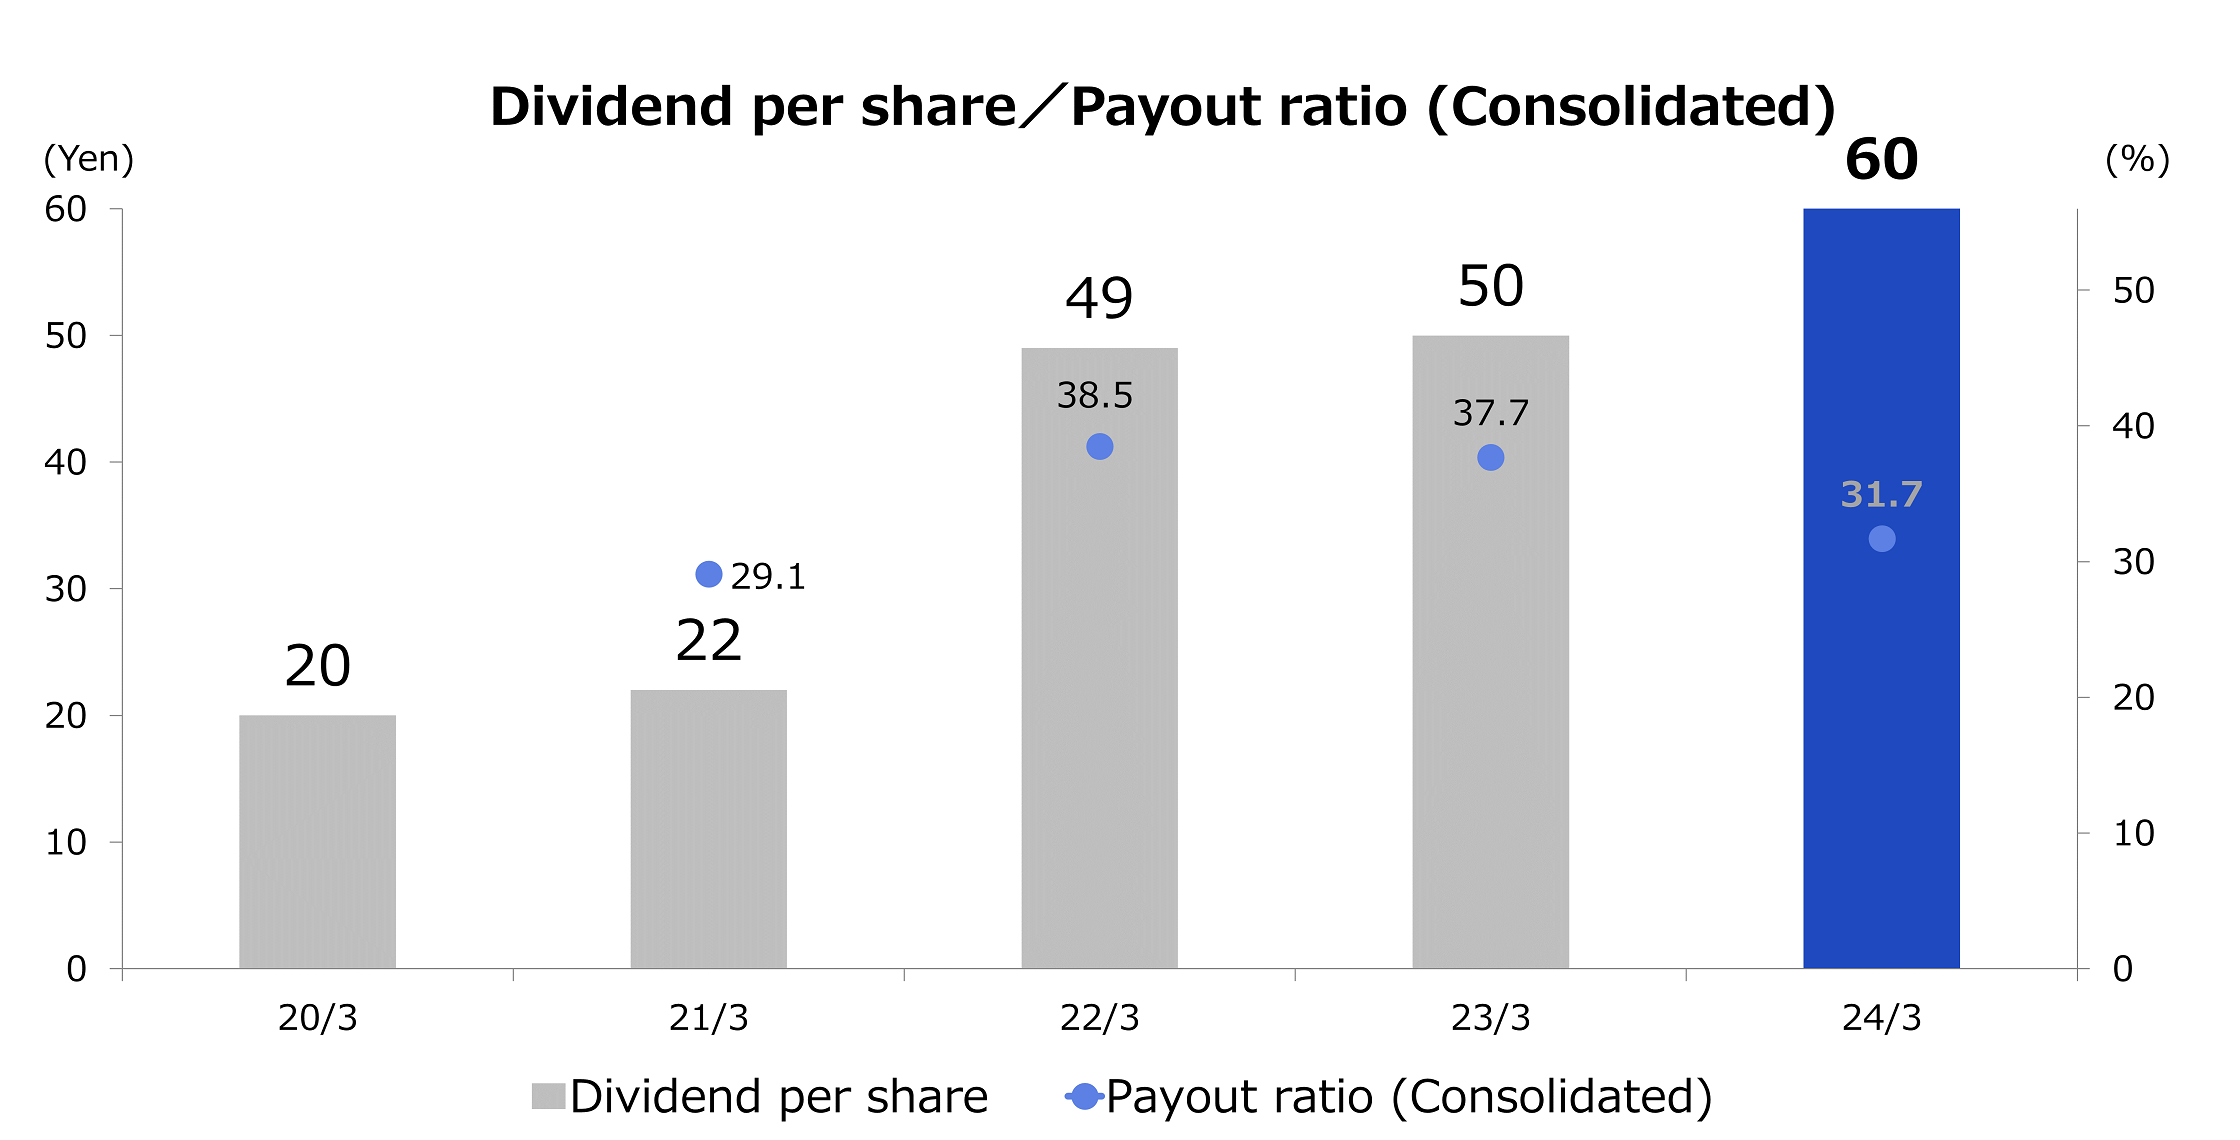 Dividend per share/payout ratio